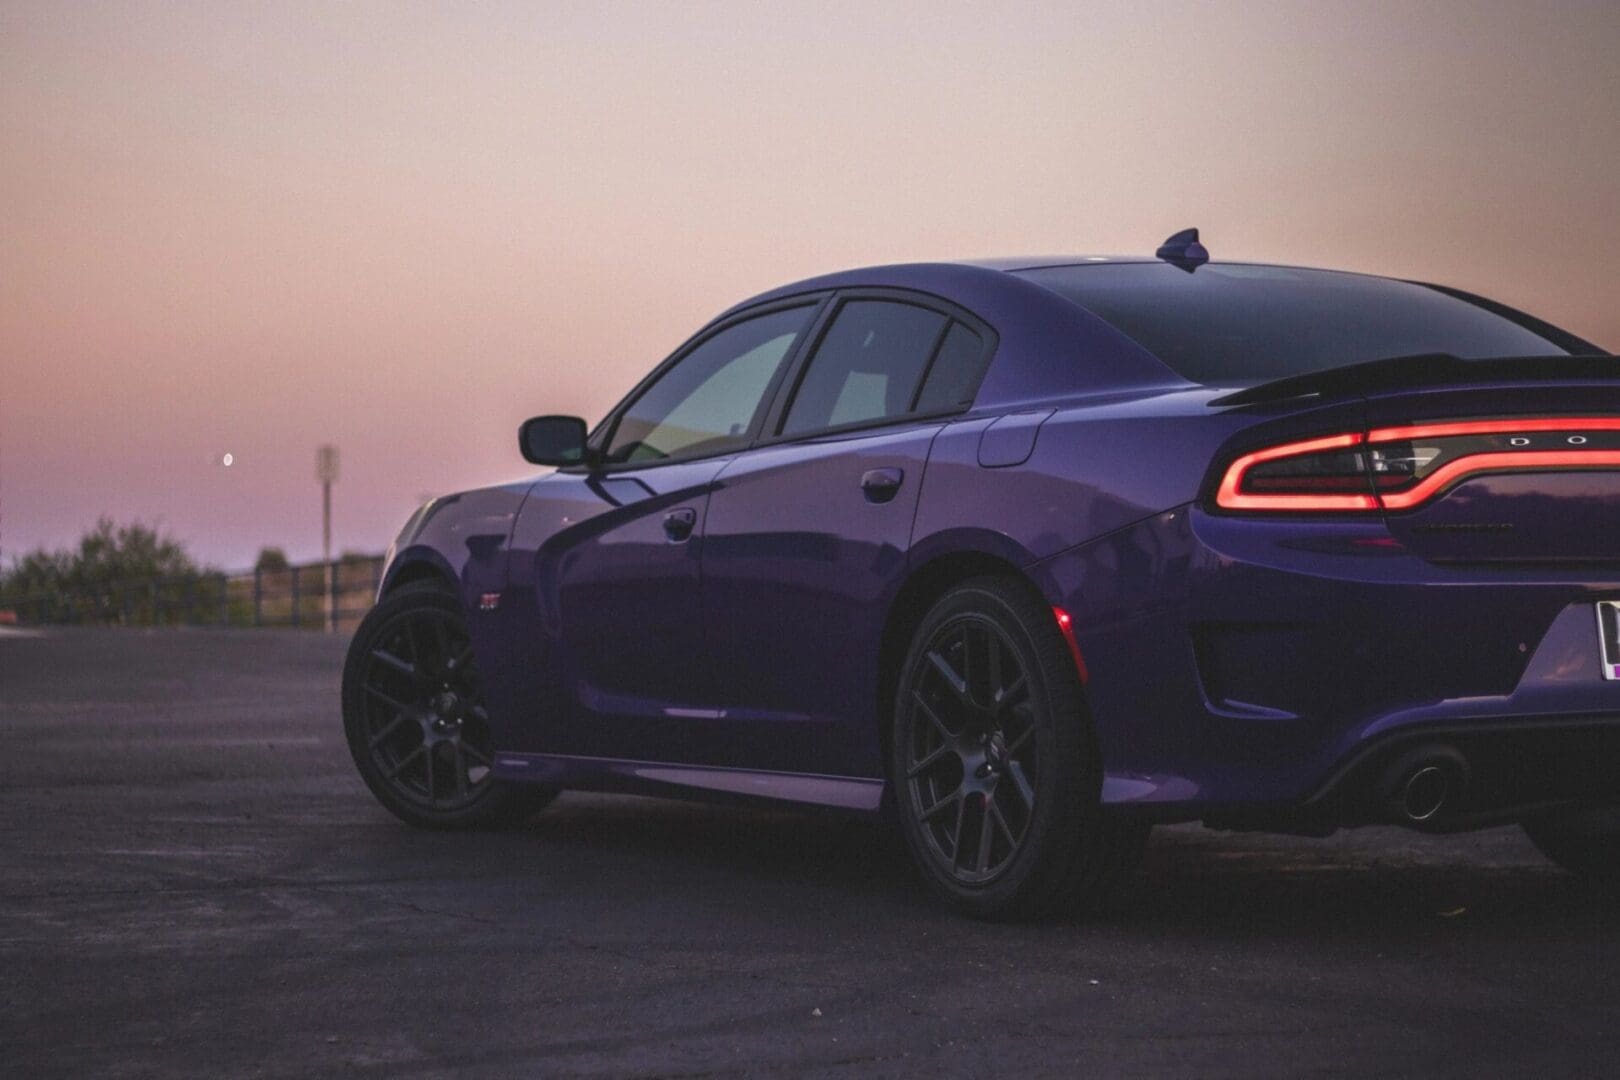 A purple dodge charger parked in a parking lot at sunset.